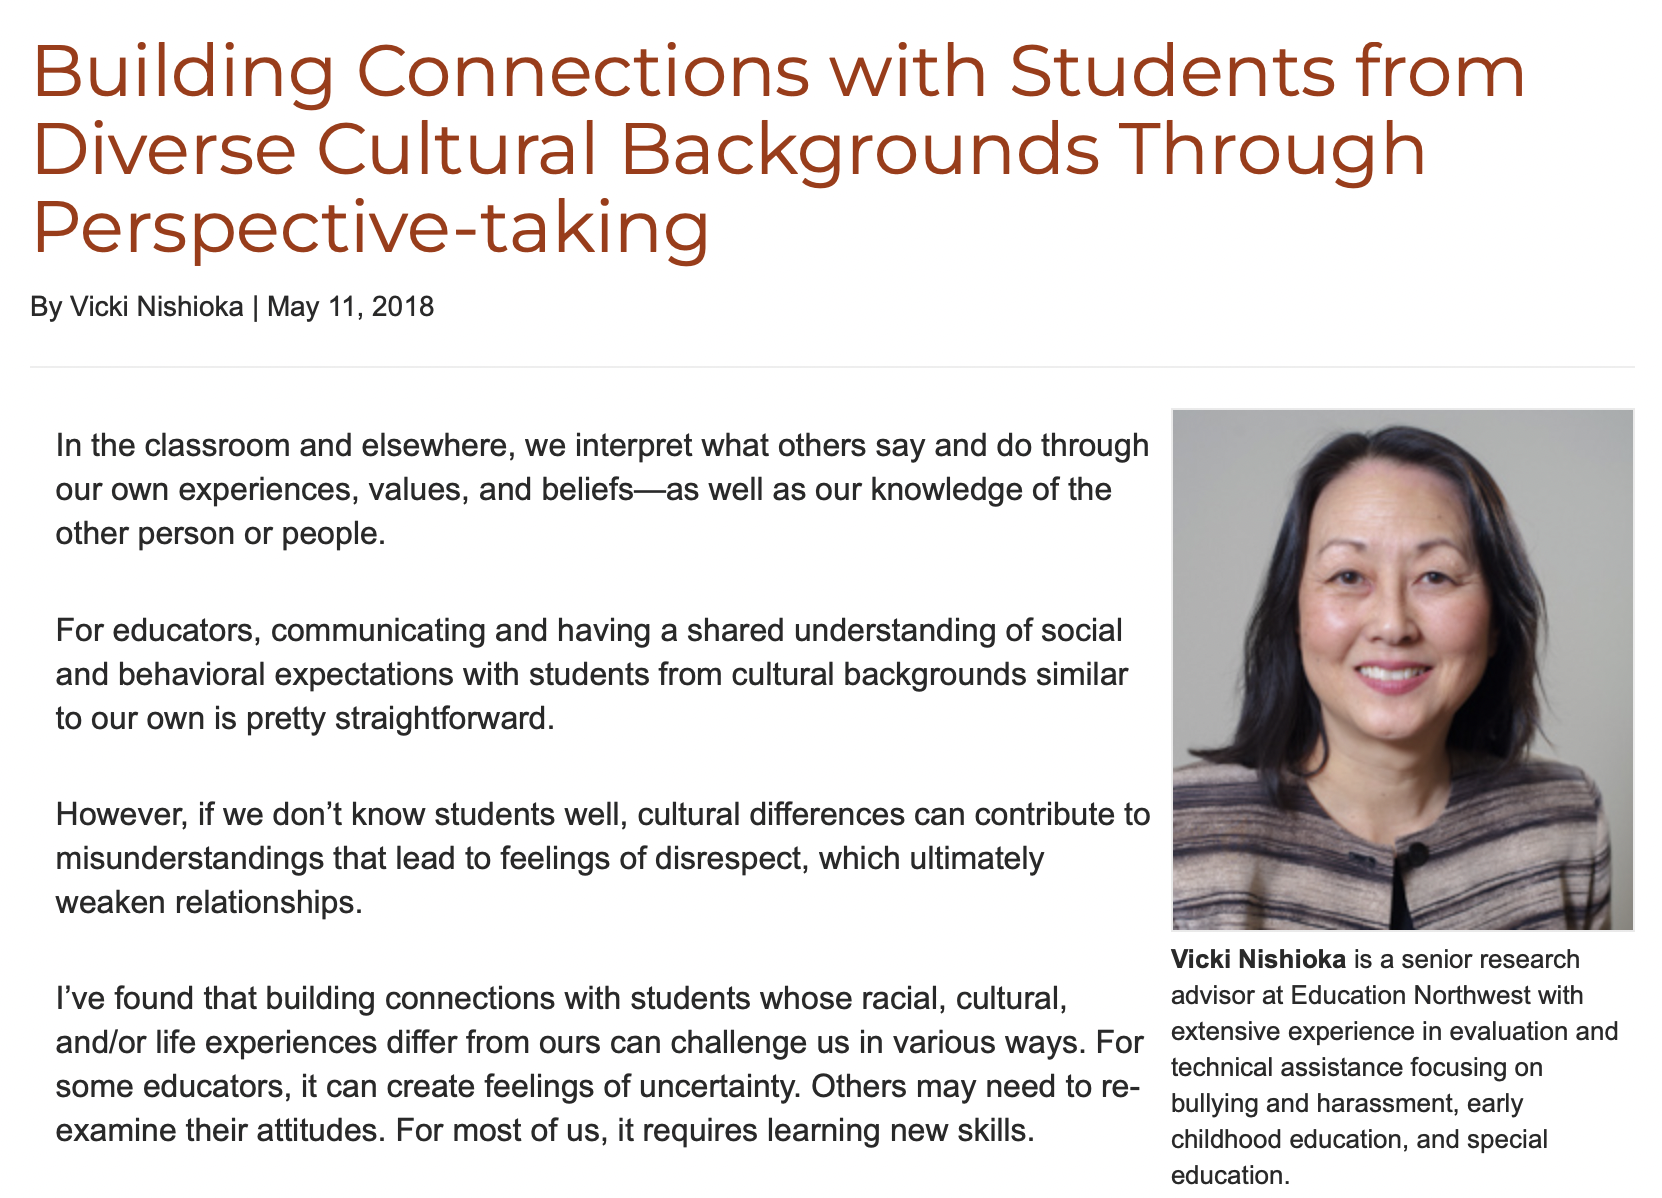 Building Connections with Students from Diverse Cultural Backgrounds Through Perspective-taking